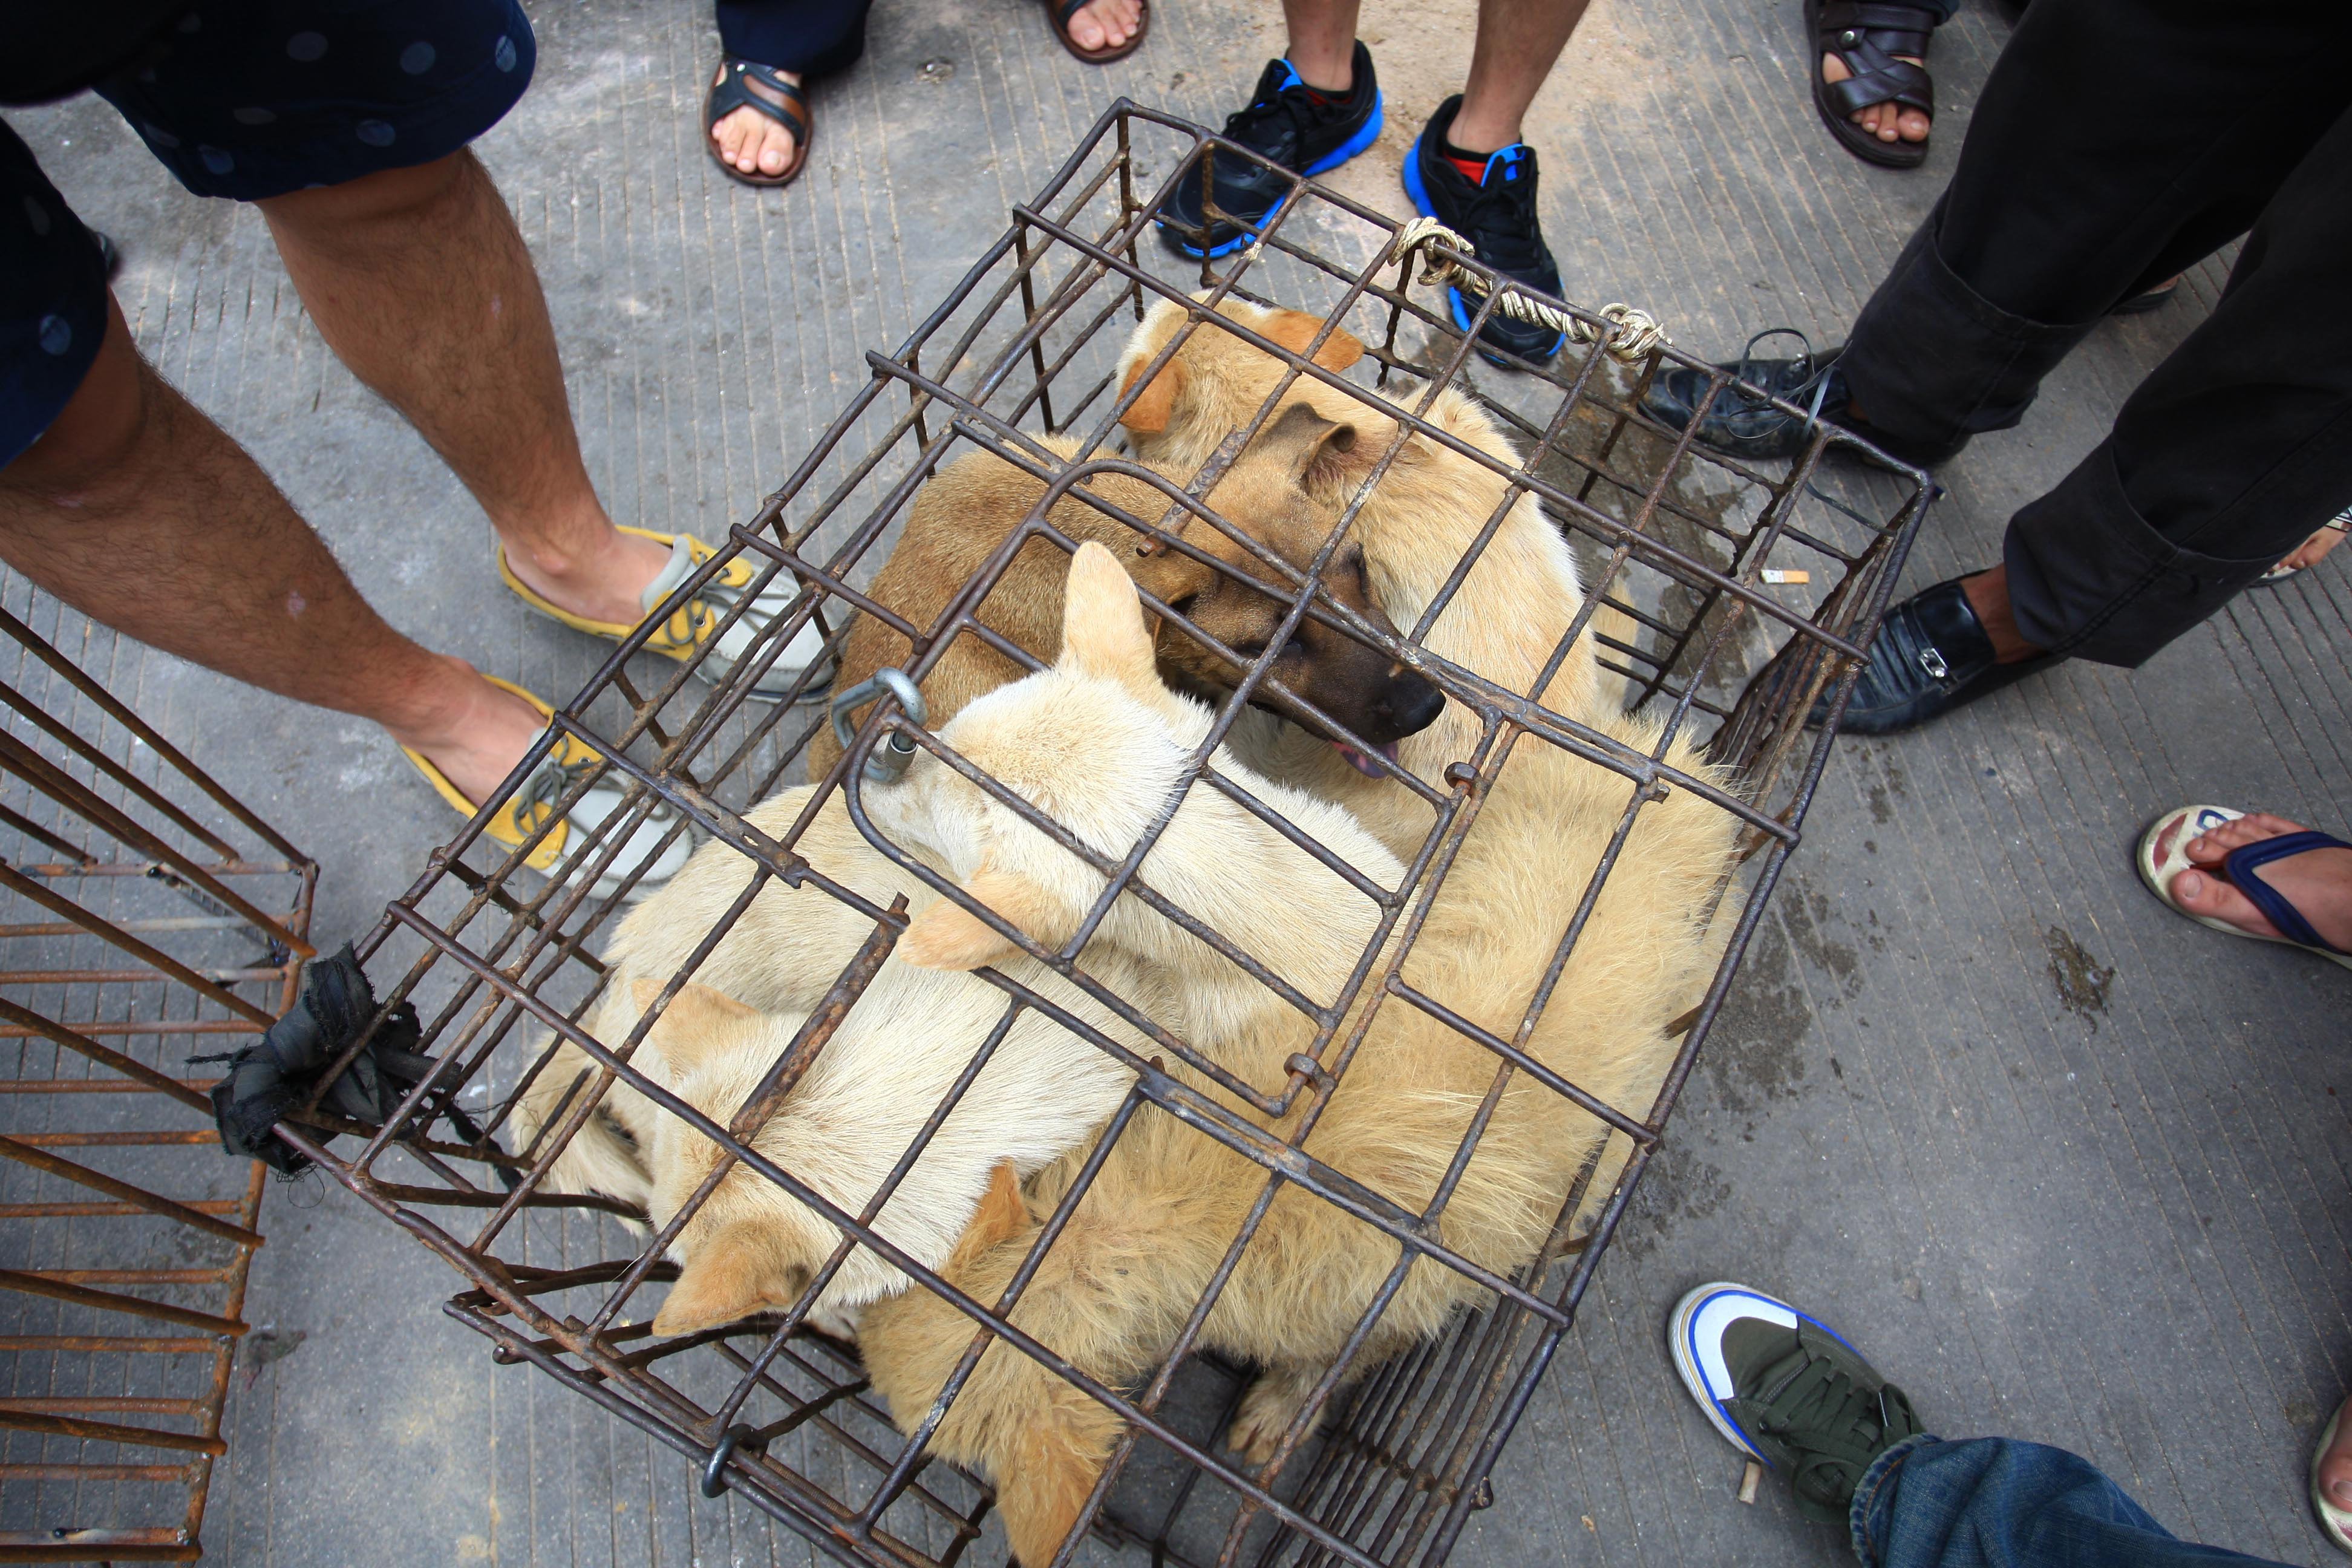 Dogs saved from sellers by animal protection activists are seen squashed in a cage at a market in Yulin, in Guangxi Zhuang autonomous region, on June 20, 2014. Photo: AFP